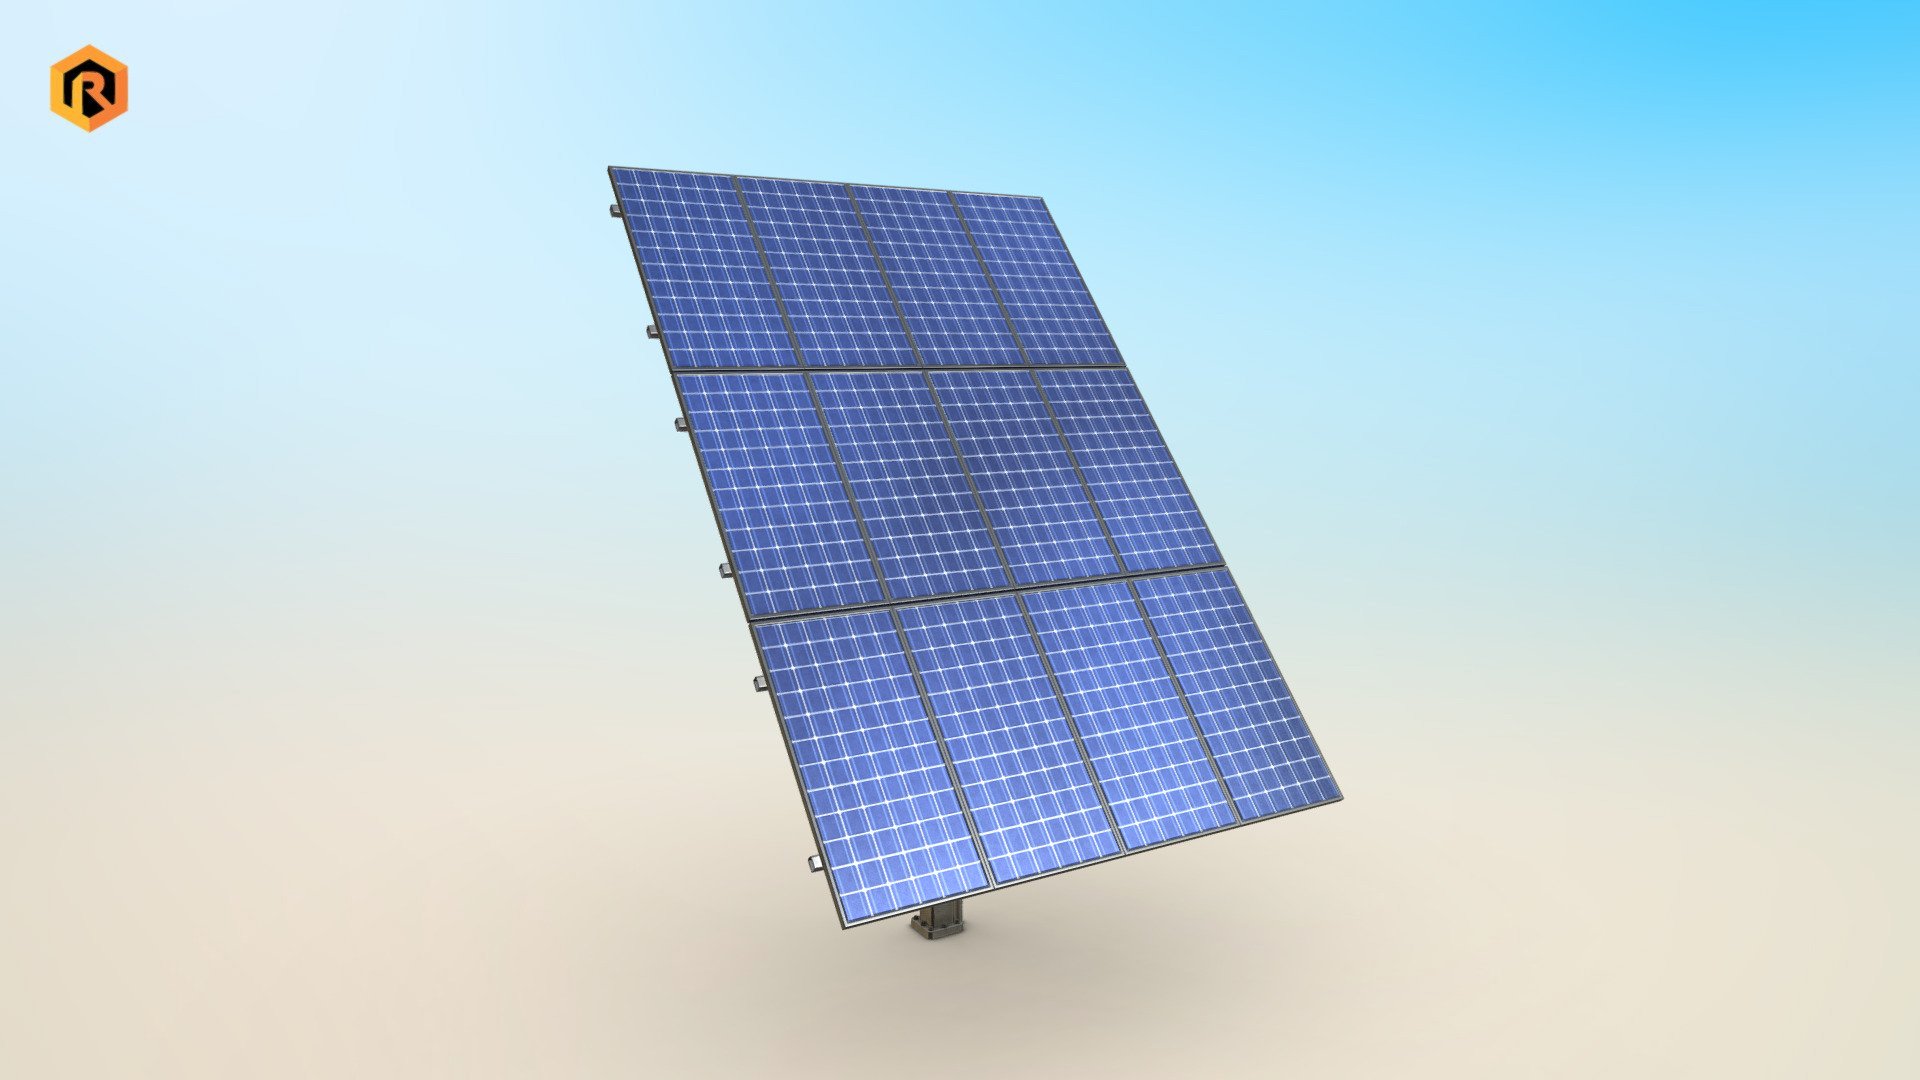 Low-poly PBR 3D models of Solar Panels.

There are 3 variations of this asset in the package. Centered and pointing to left and right.

This object is best for use in games and other VR / AR, real-time applications such as Unity or Unreal Engine.   

Technical details:




2 PBR textures sets (Main Body and Solar Panels) 

10340 Triangles

11530  Vertices

The model is divided into 2 objects (Main Body and Panels)

Model is completely unwrapped

Model is fully textured with all materials applied

Lot of additional file formats included (Blender, Unity, Maya etc.)

PBR texture sets details:




4096 MainBody PBR texture set (Albedo, Metallic, Smoothness, Normal, AO)

2048 SolarPanels PBR texture set (Albedo, Metallic, Smoothness, Normal, AO)

More file formats are available in additional zip file on product page.  

Please feel free to contact me if you have any questions or need any support for this asset.

Support e-mail: support@rescue3d.com - Solar Panels - Buy Royalty Free 3D model by Rescue3D Assets (@rescue3d) 3d model